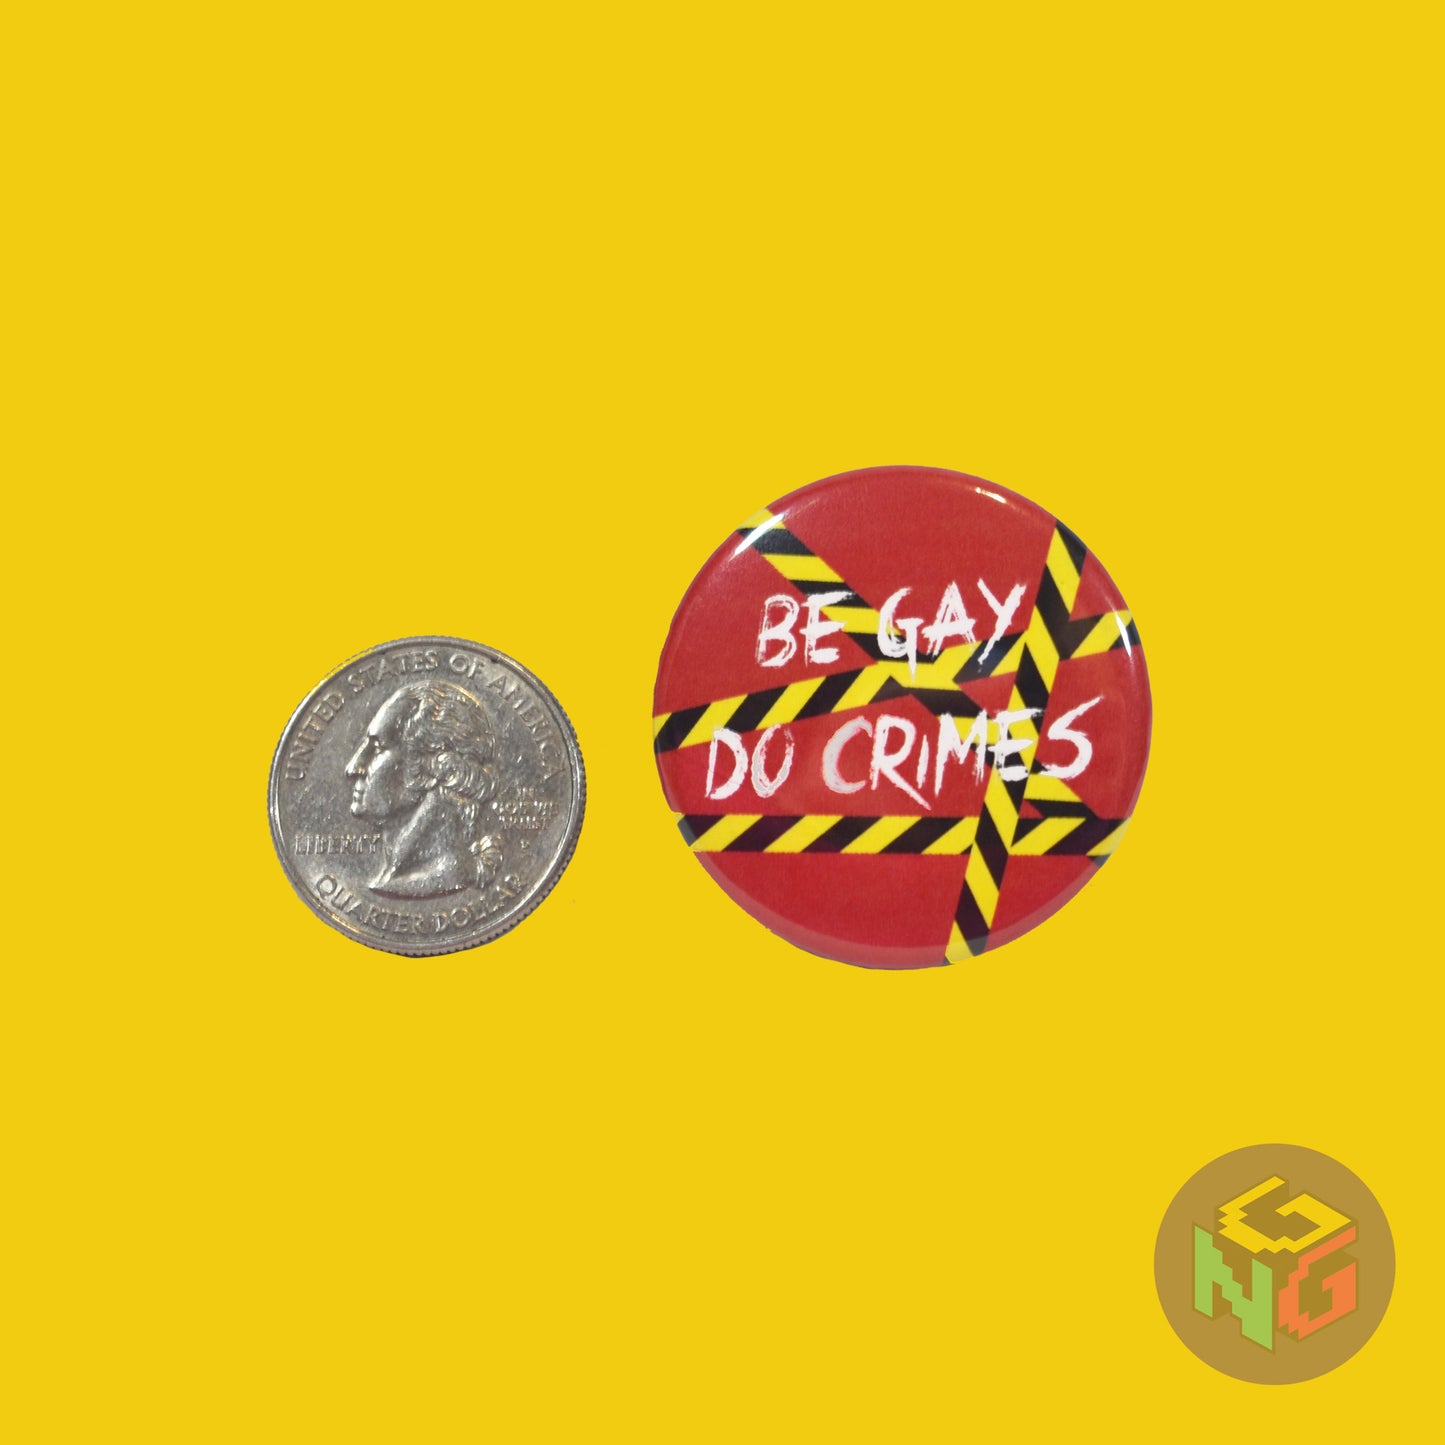 be gay do crimes button next to a quarter for scale on a yellow background